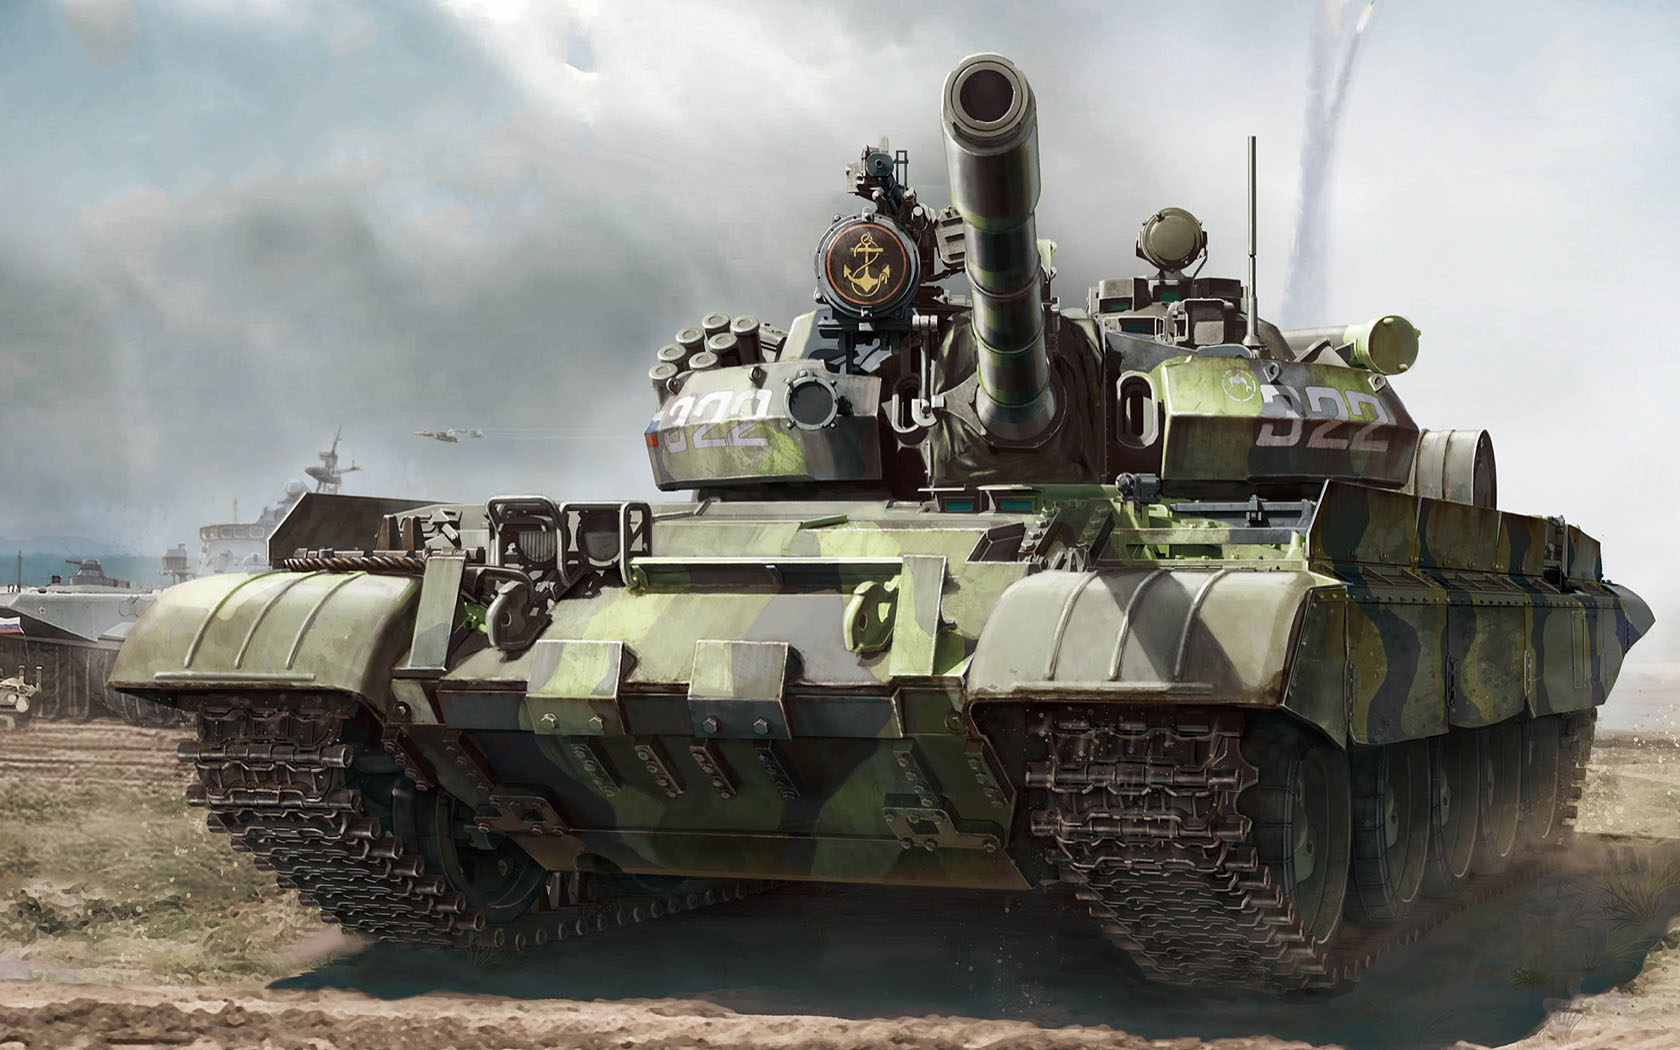 General 1680x1050 tank army military military vehicle artwork clouds frontal view T-55AM-1 Russian/Soviet tanks